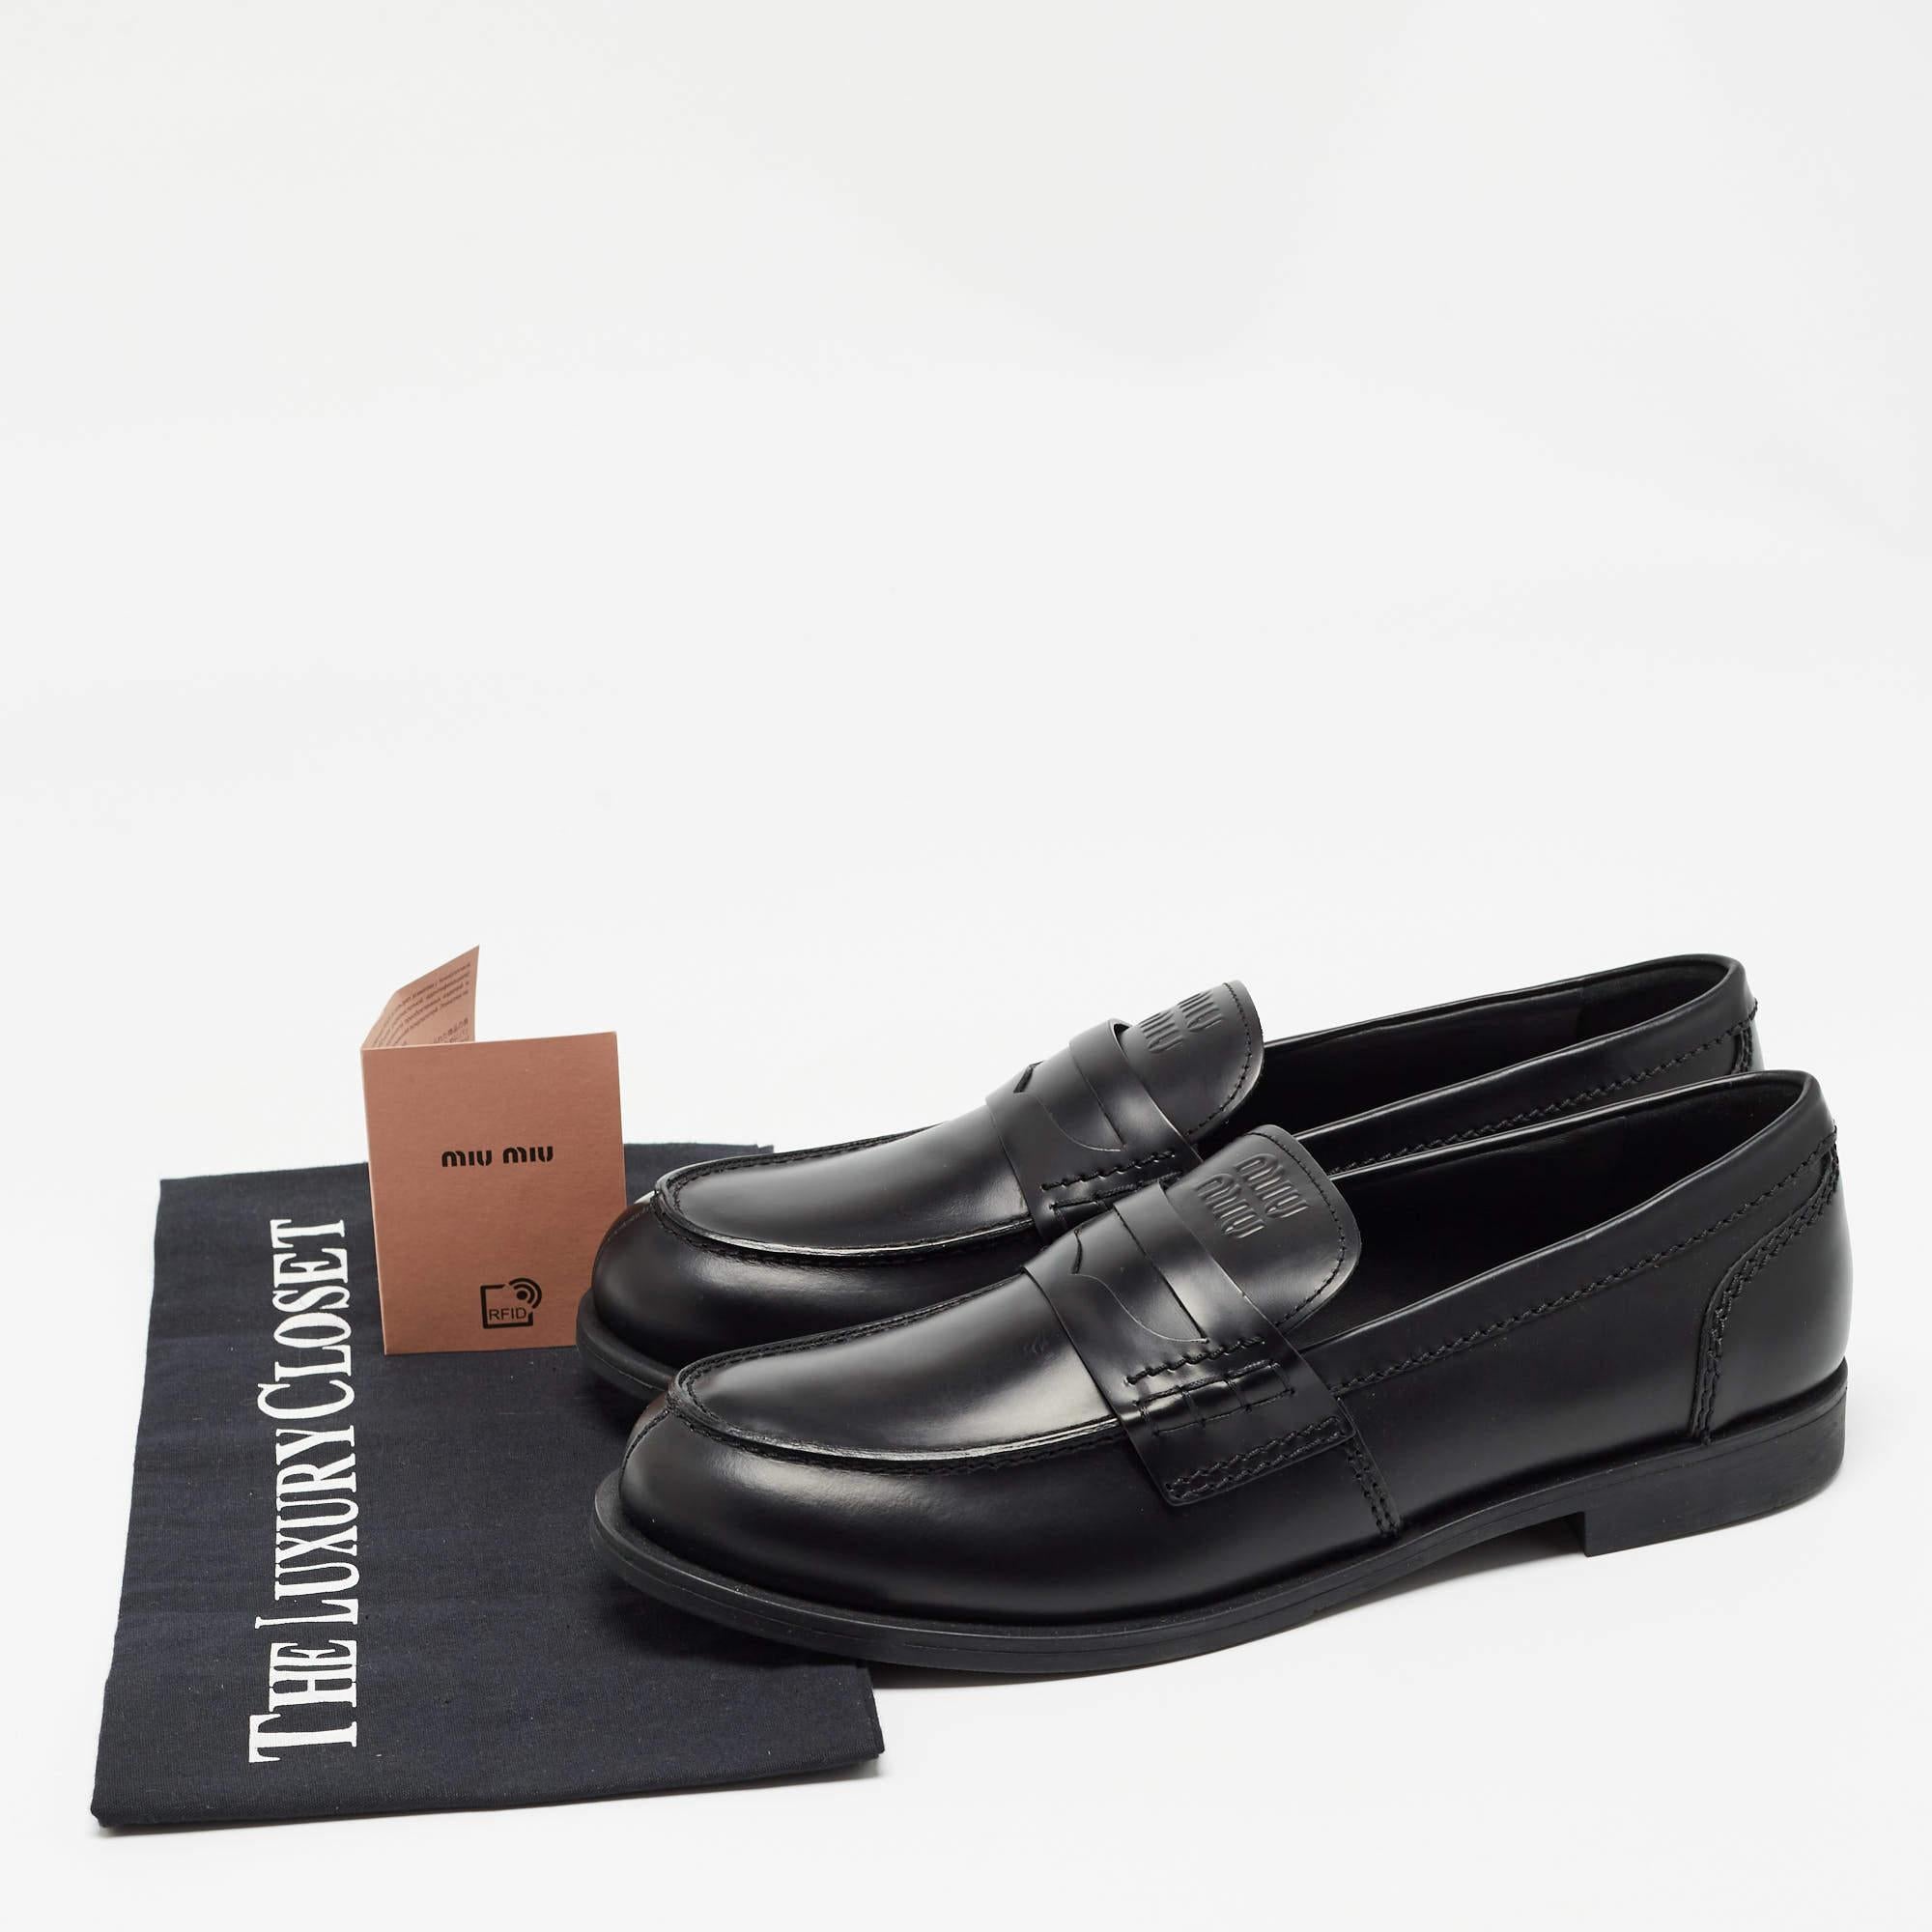 Miu Miu Black Leather Slip On Loafers Size 39.5 For Sale 5